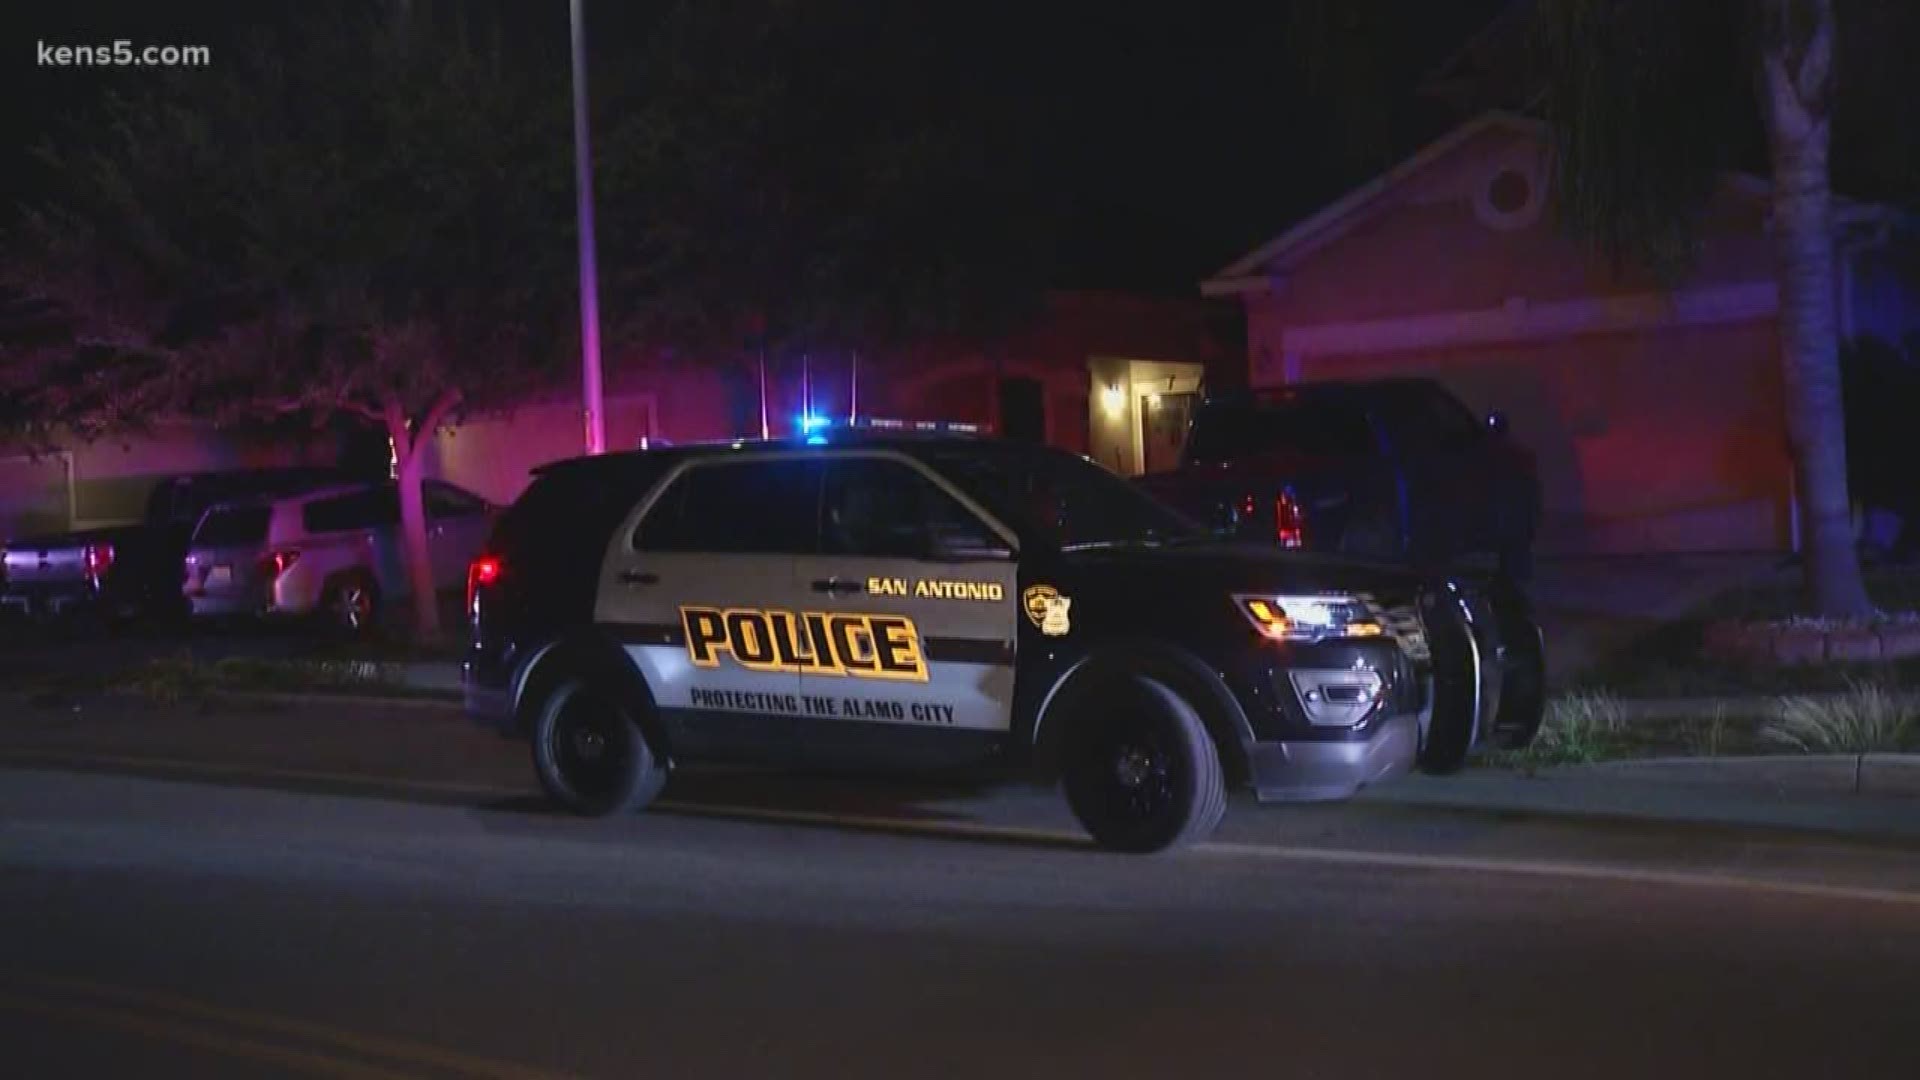 A man was shot twice in the chest and two juveniles were seen running away from the scene, San Antonio Police said.